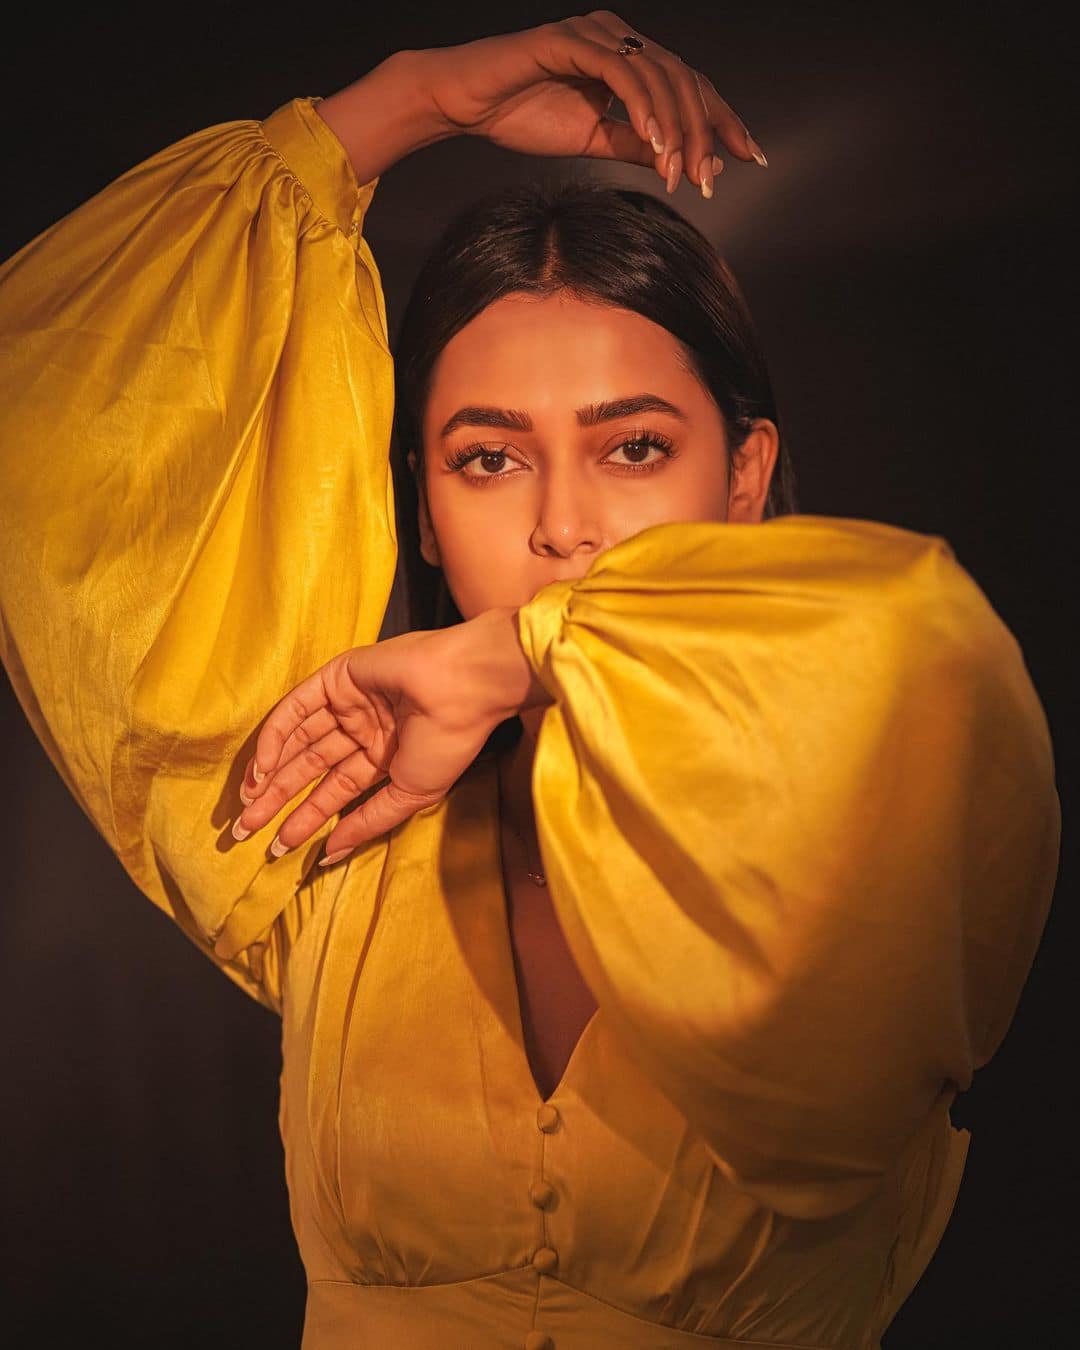 Tejasswi opts for minimal accessories for her look